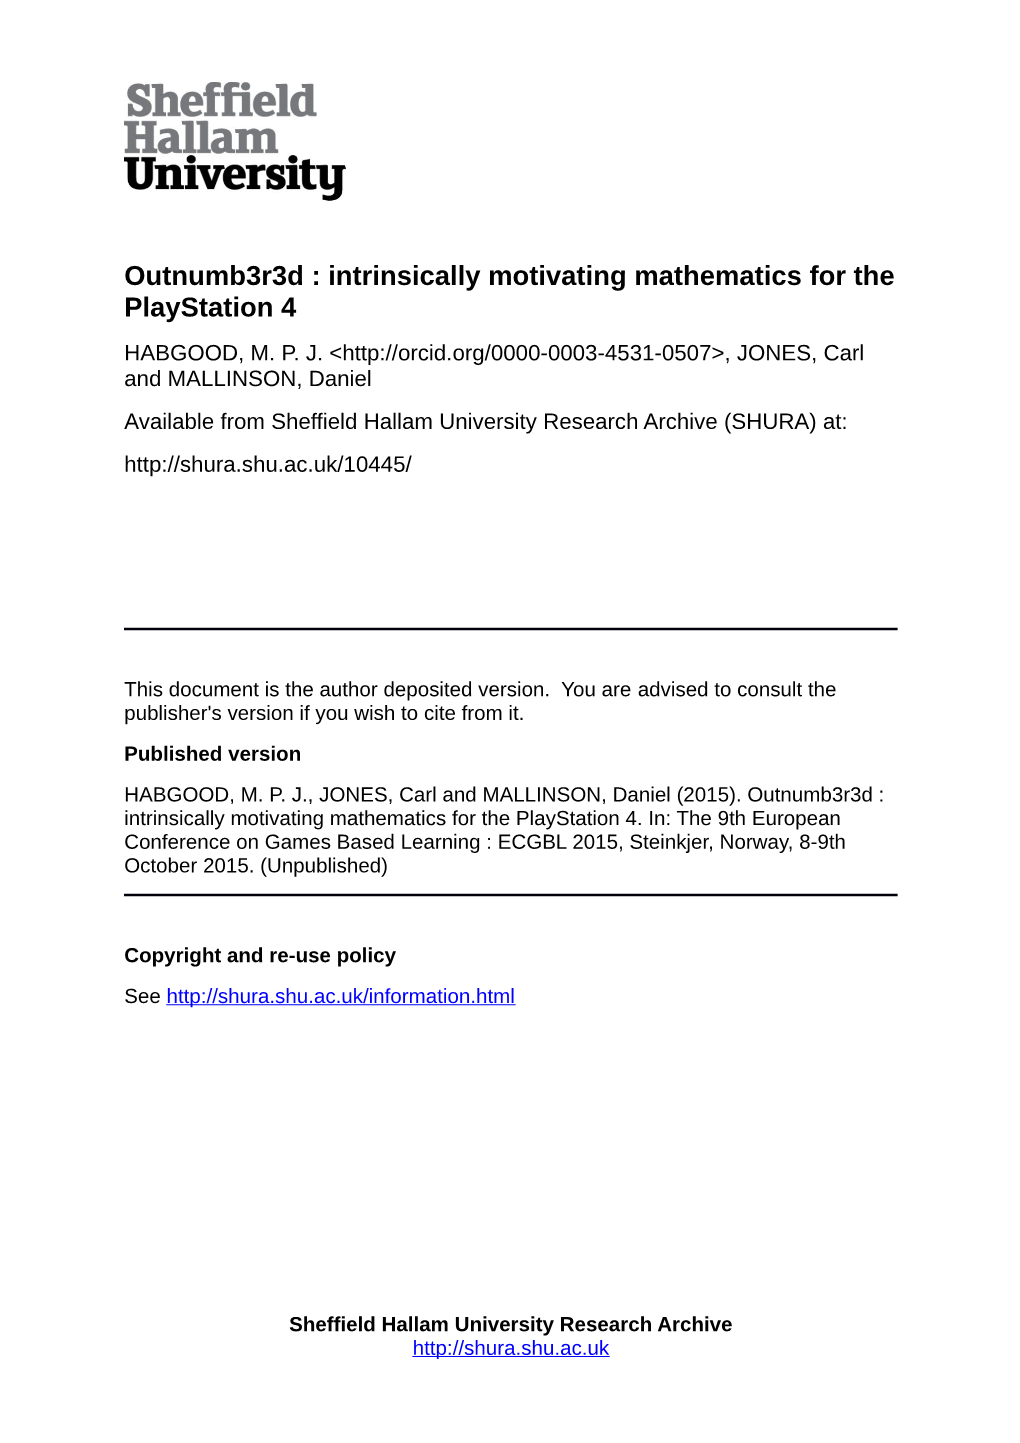 Outnumb3r3d : Intrinsically Motivating Mathematics for the Playstation 4 HABGOOD, M